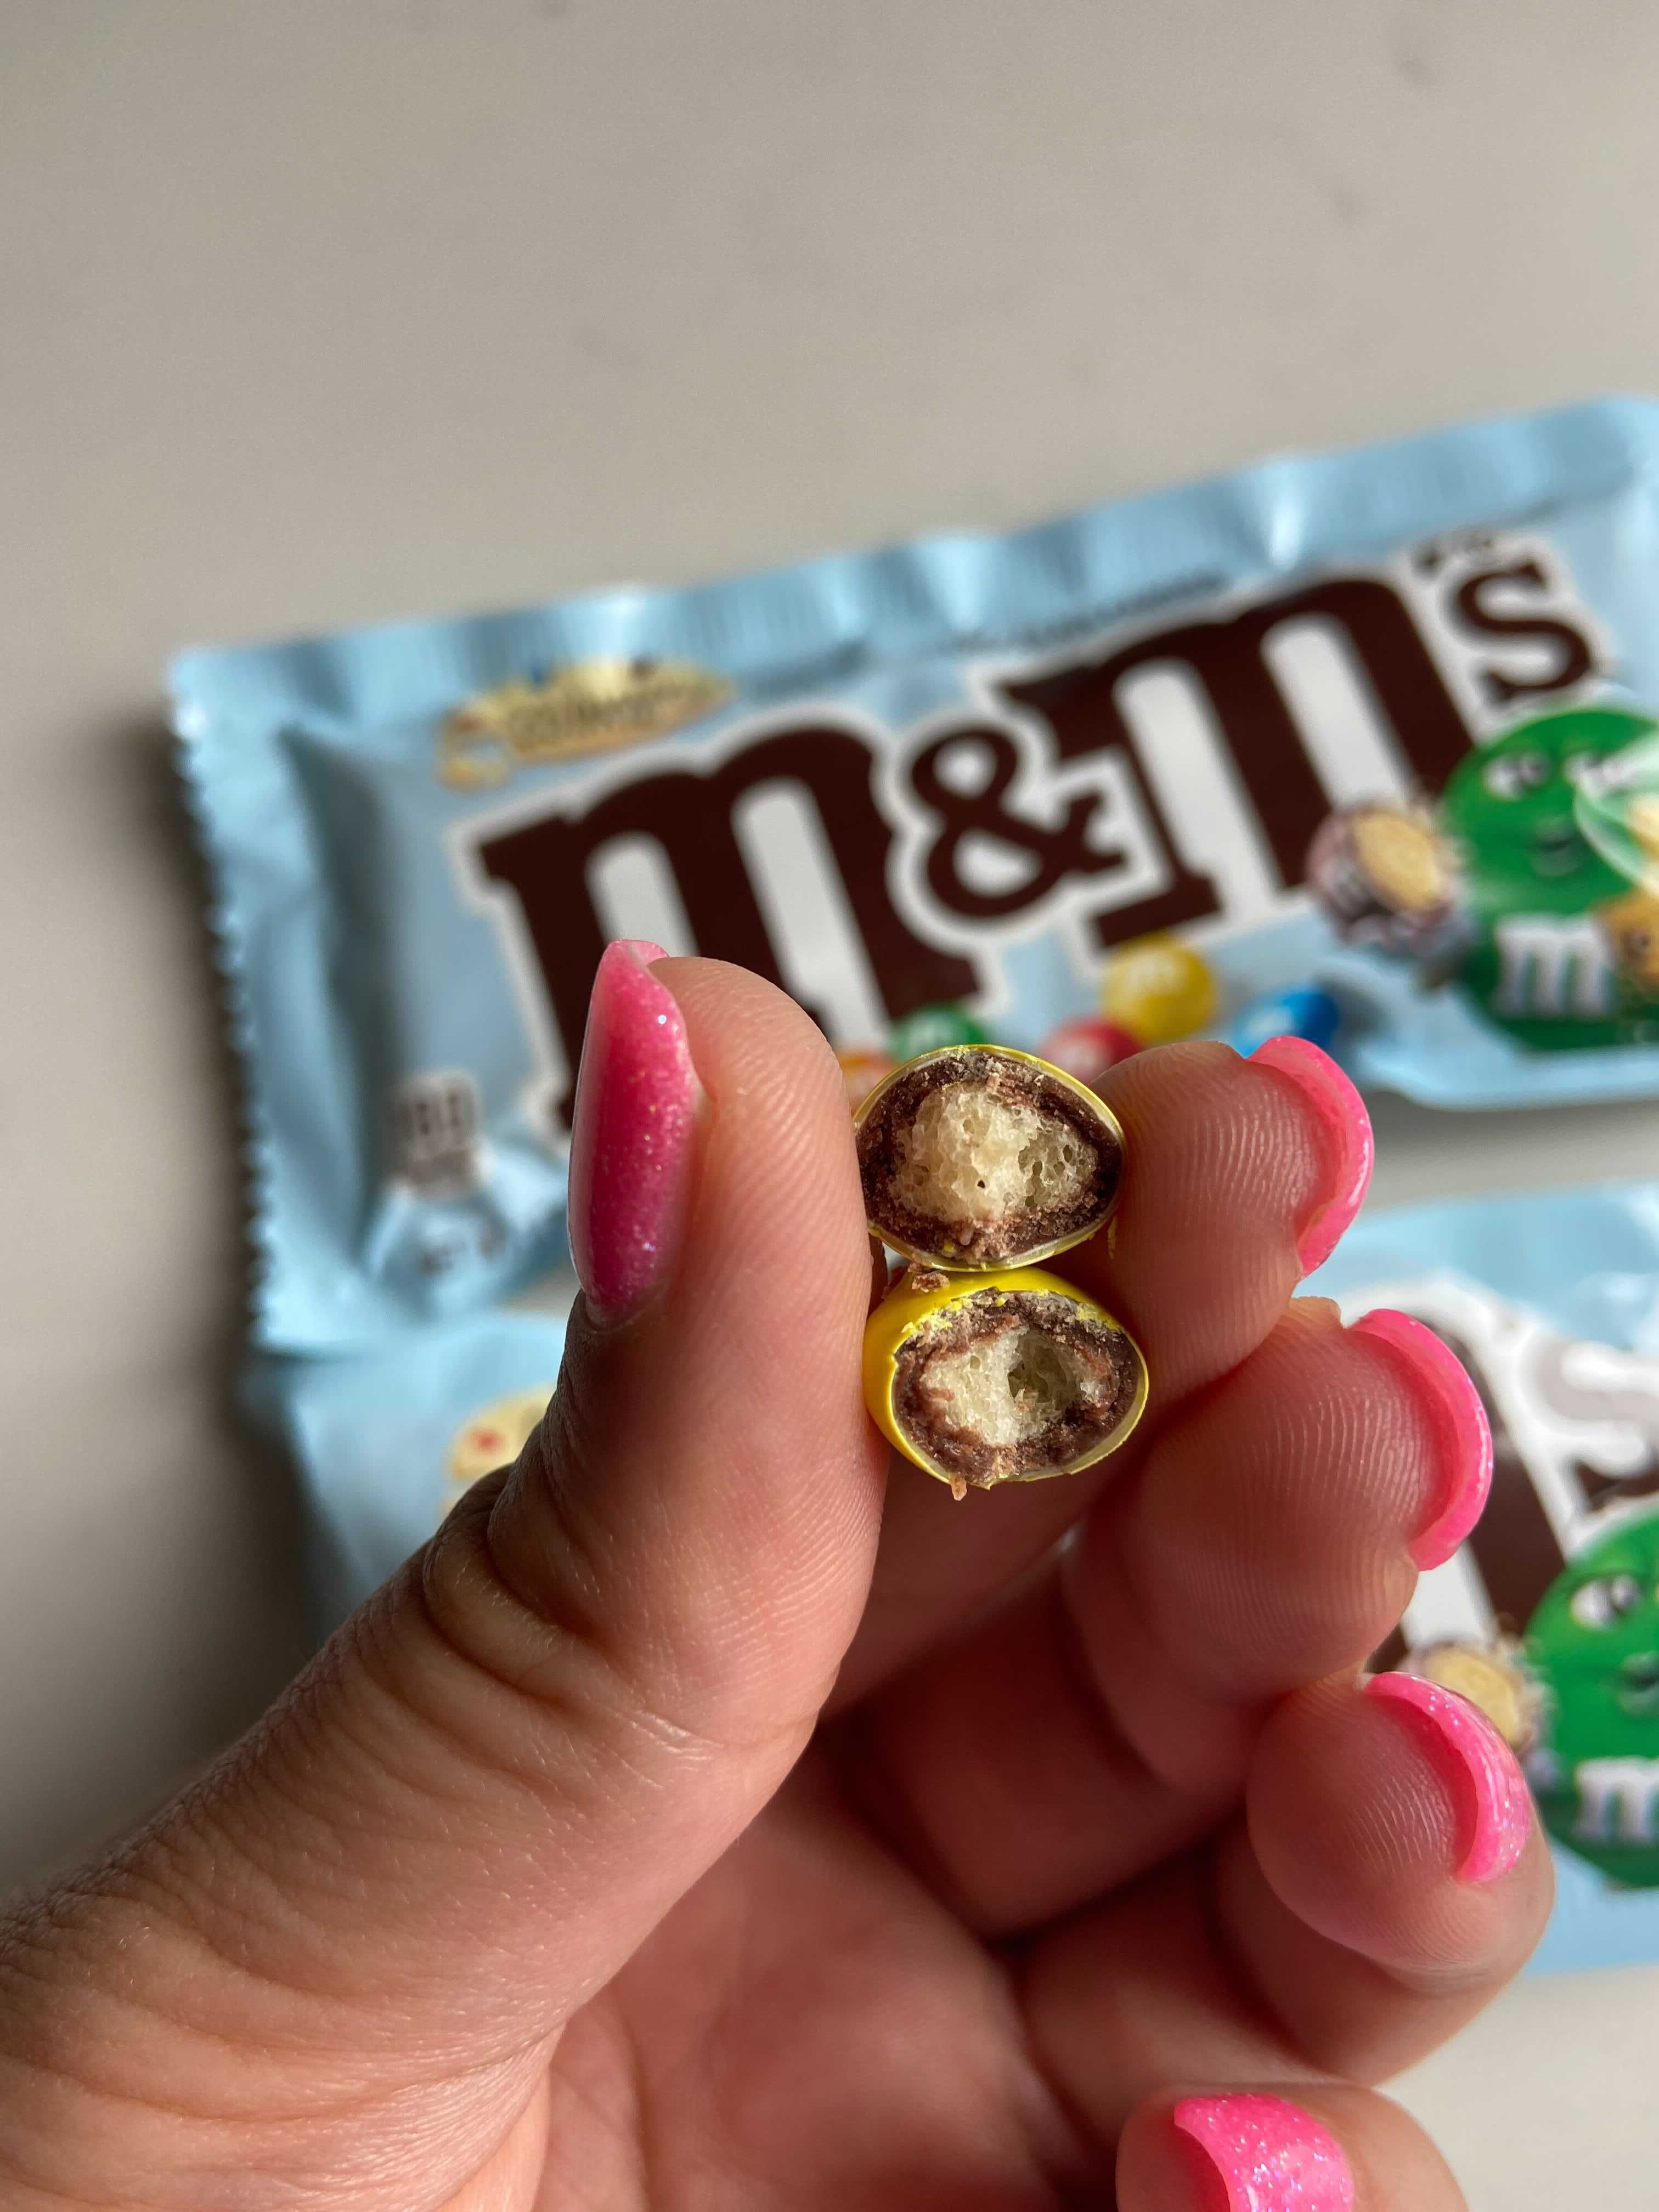 REVIEW: Crunchy Cookie M&M's - The Impulsive Buy